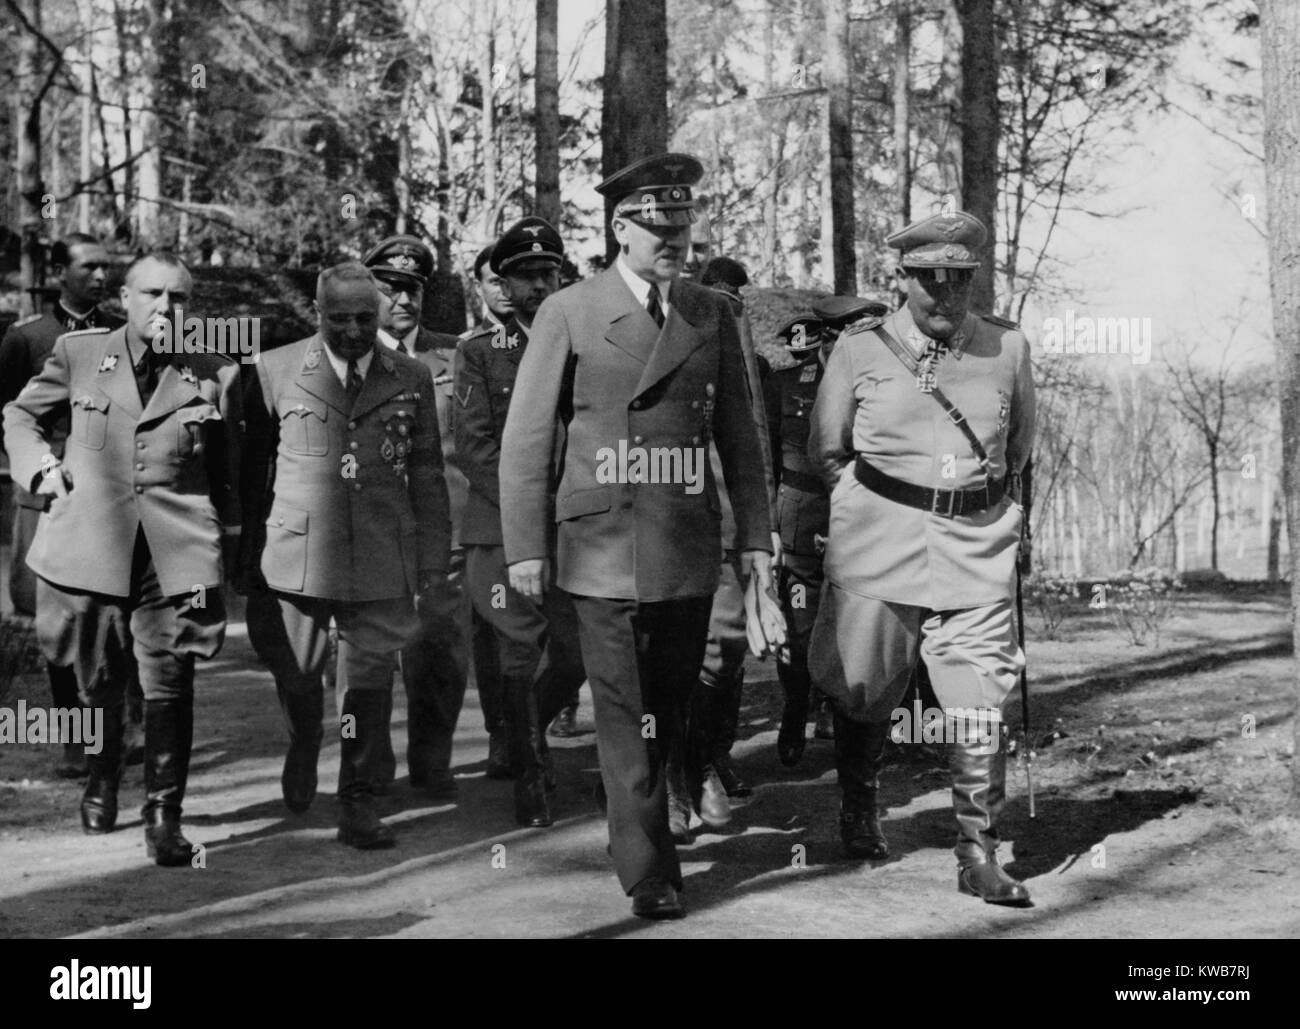 Adolf Hitler and Hermann Goering walking in a group. L-R: Martin Bormann, Robert Ley and Heinrich Himmler. They were at Hitler's headquarters on his birthday. April 20, 1942, during World War 2. (BSLOC_2014_8_172) Stock Photo